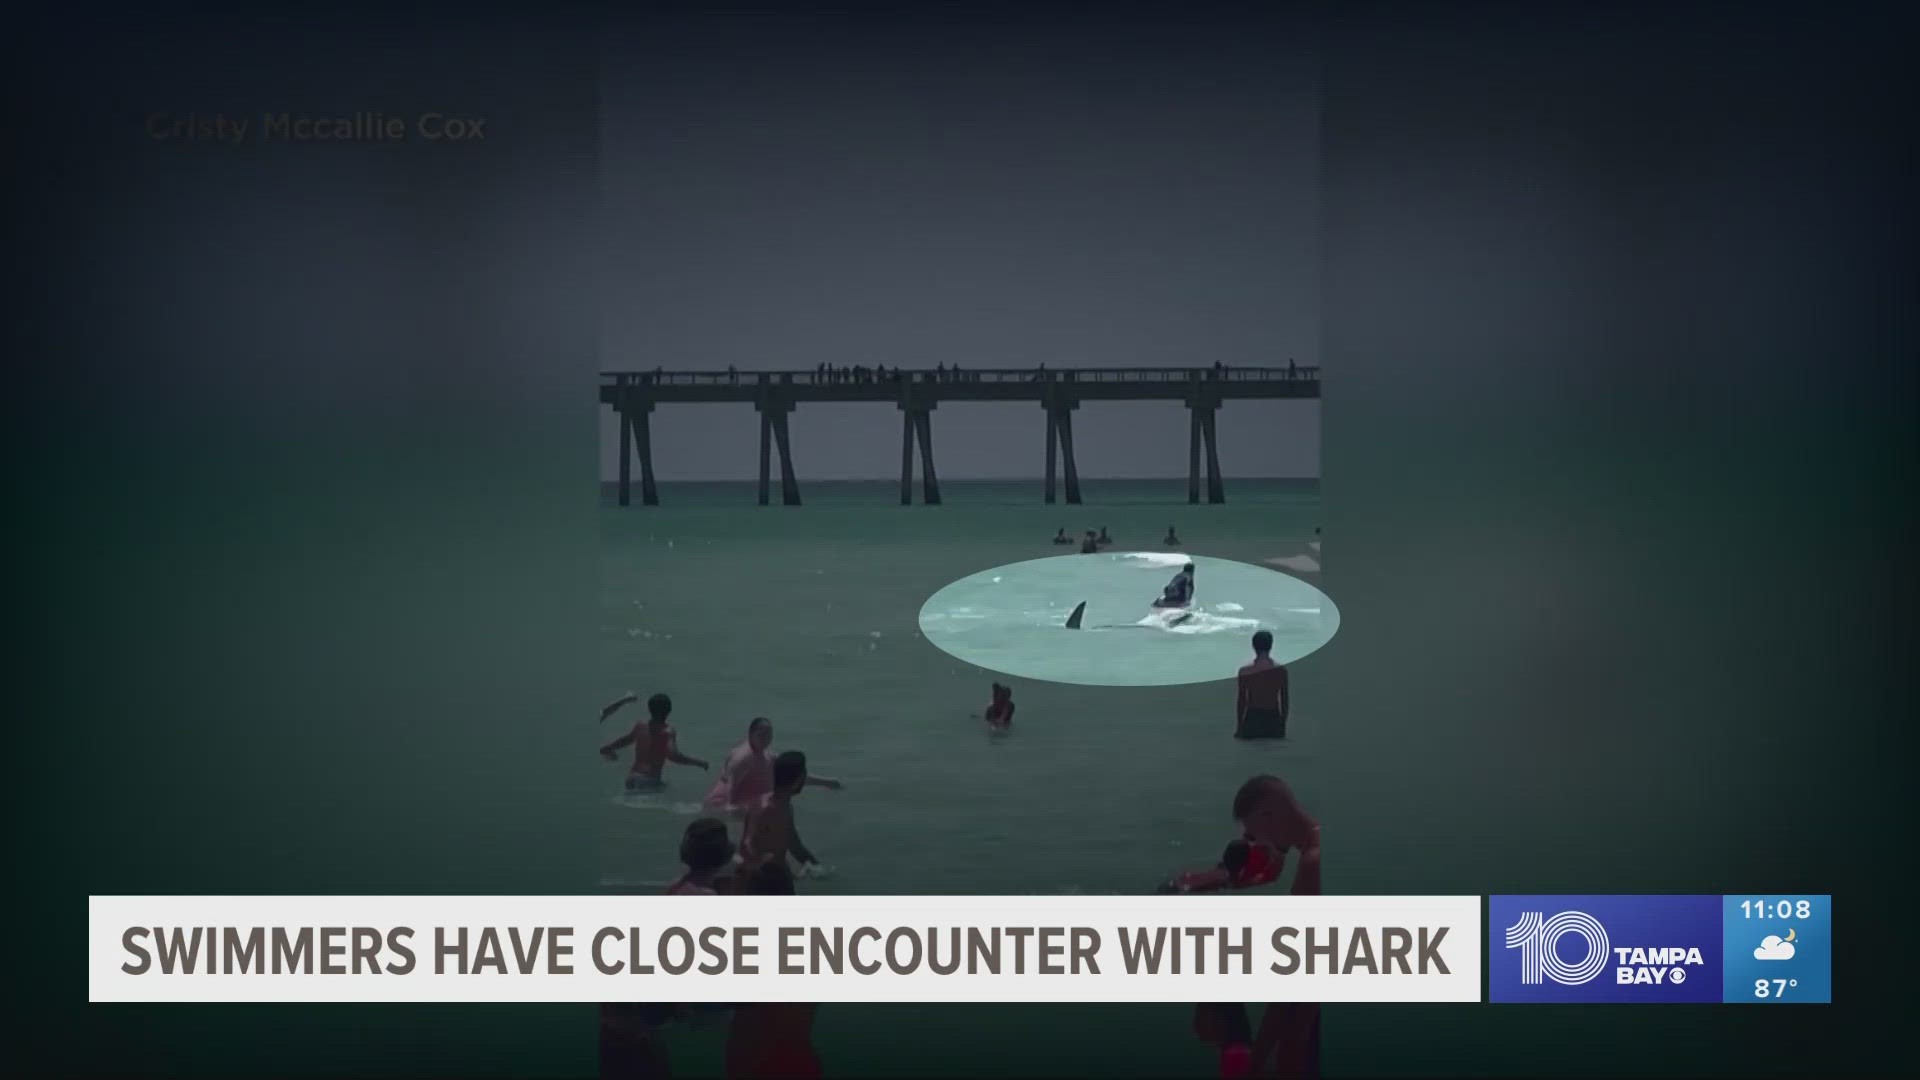 The shark can be seen swimming right between people near the shore.